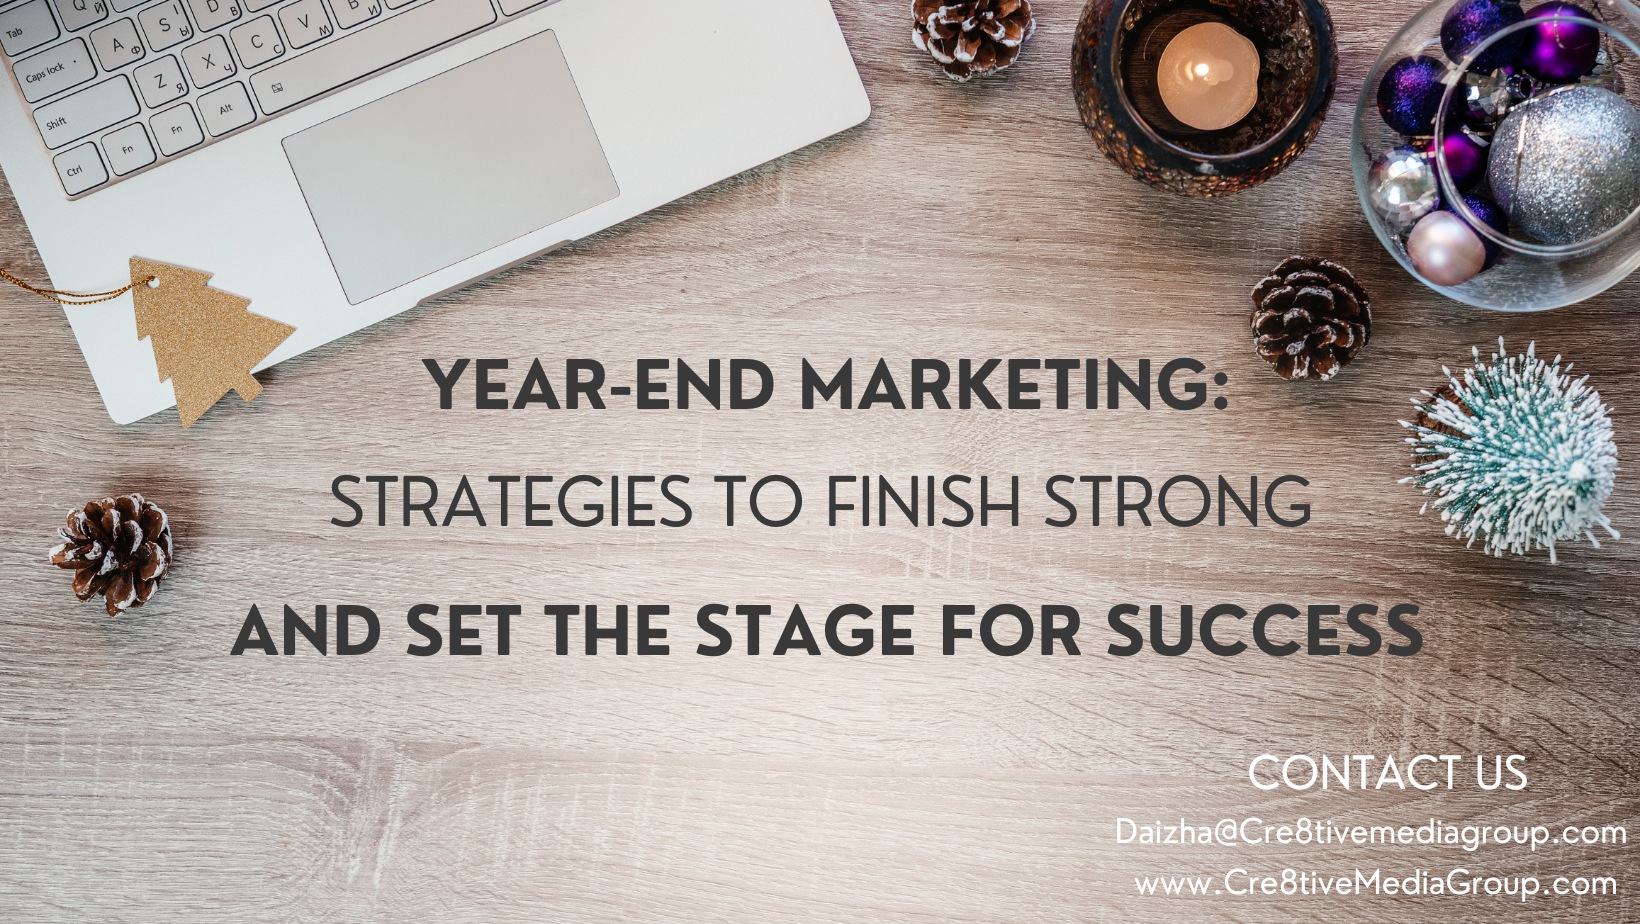 Year-End Marketing: Strategies to Finish Strong and Set the Stage for Success